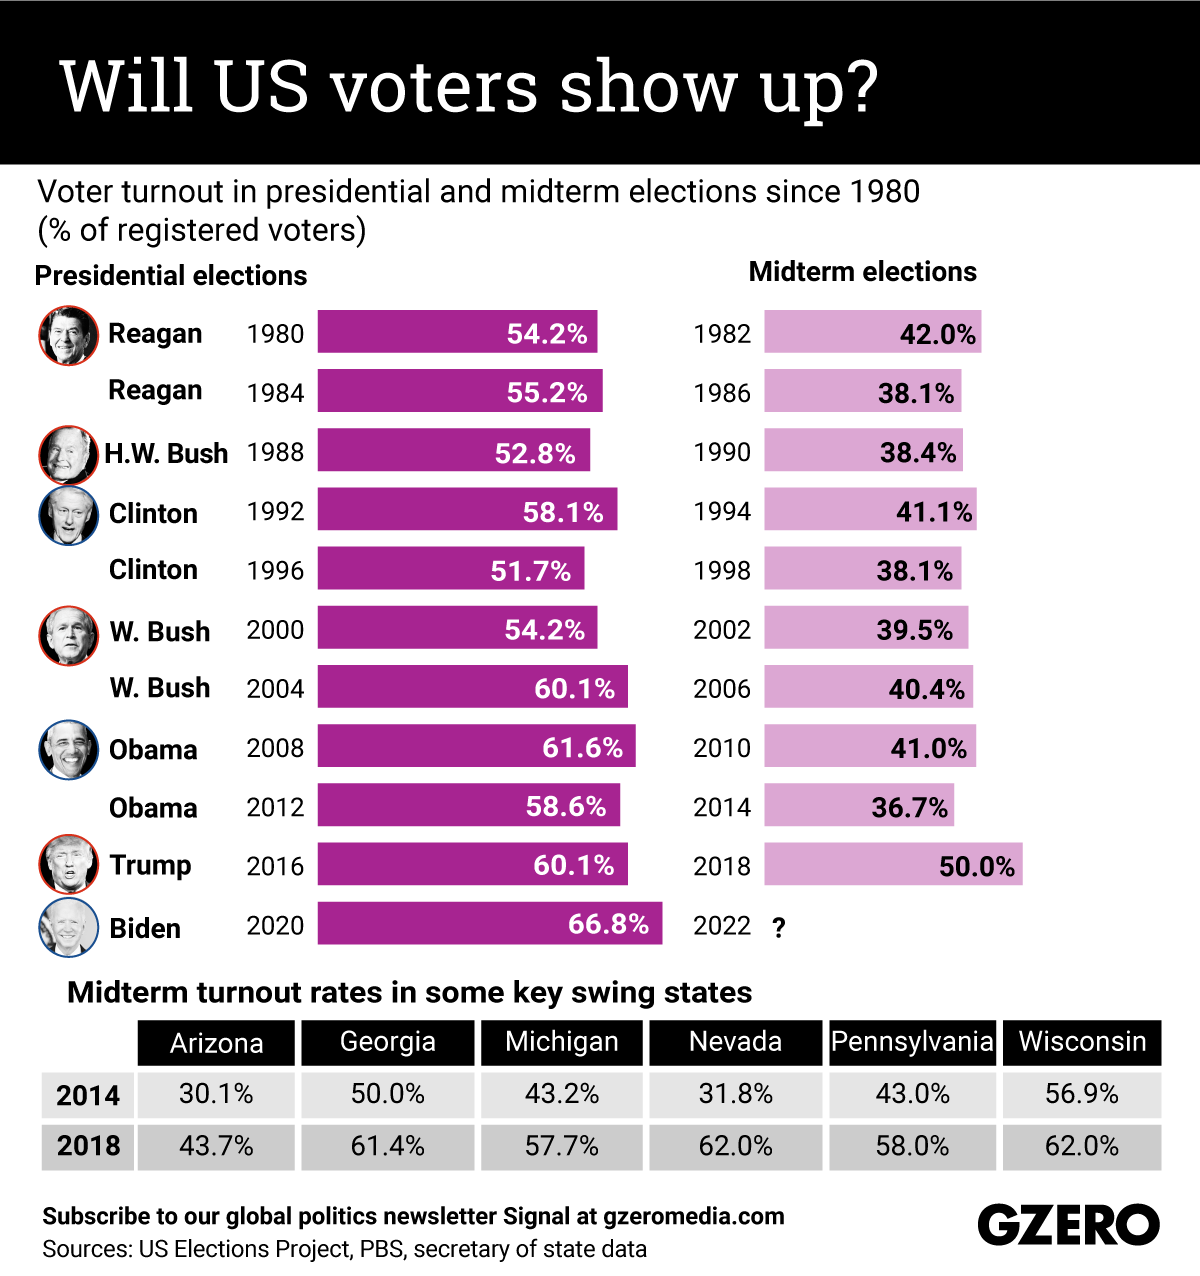 Will US voters show up